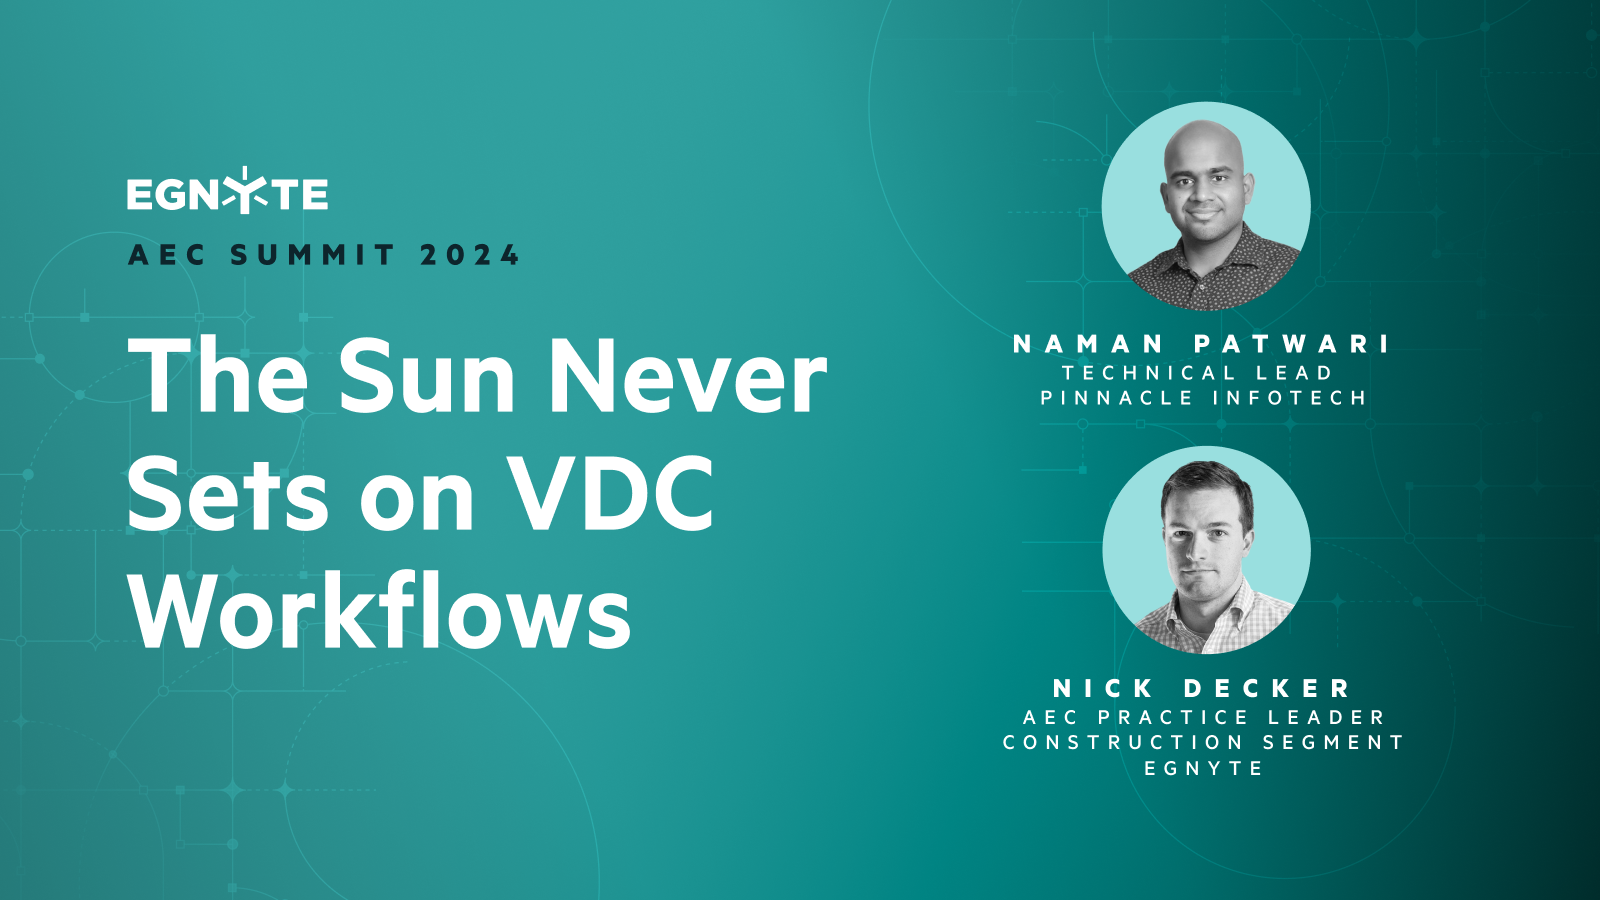 The Sun Never Sets on VDC Workflows